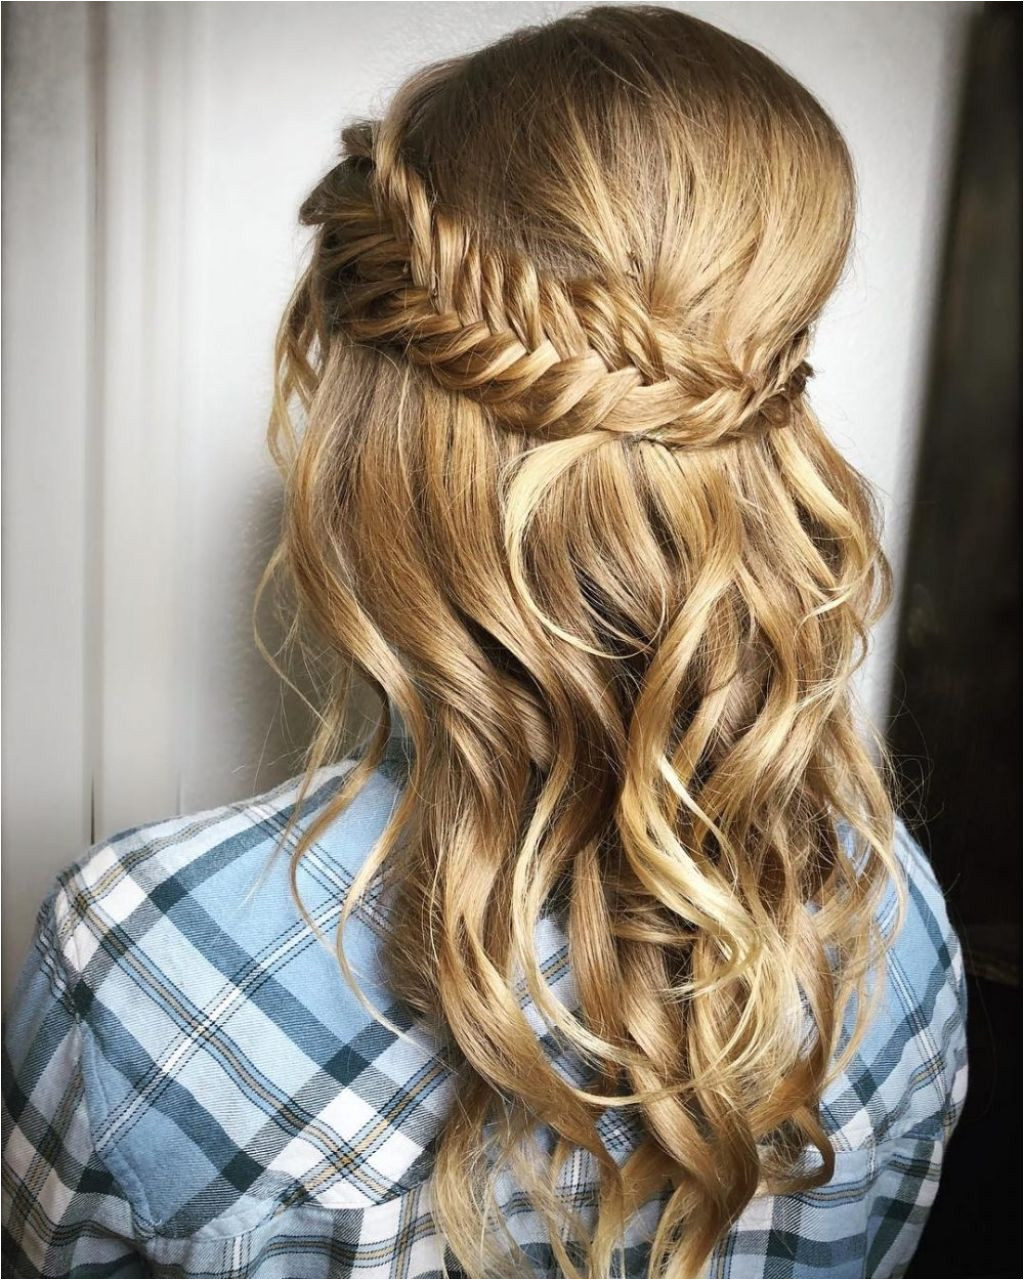 Prom hairstyles for long hair half up half down to an idea how to create prom hairstyles 20